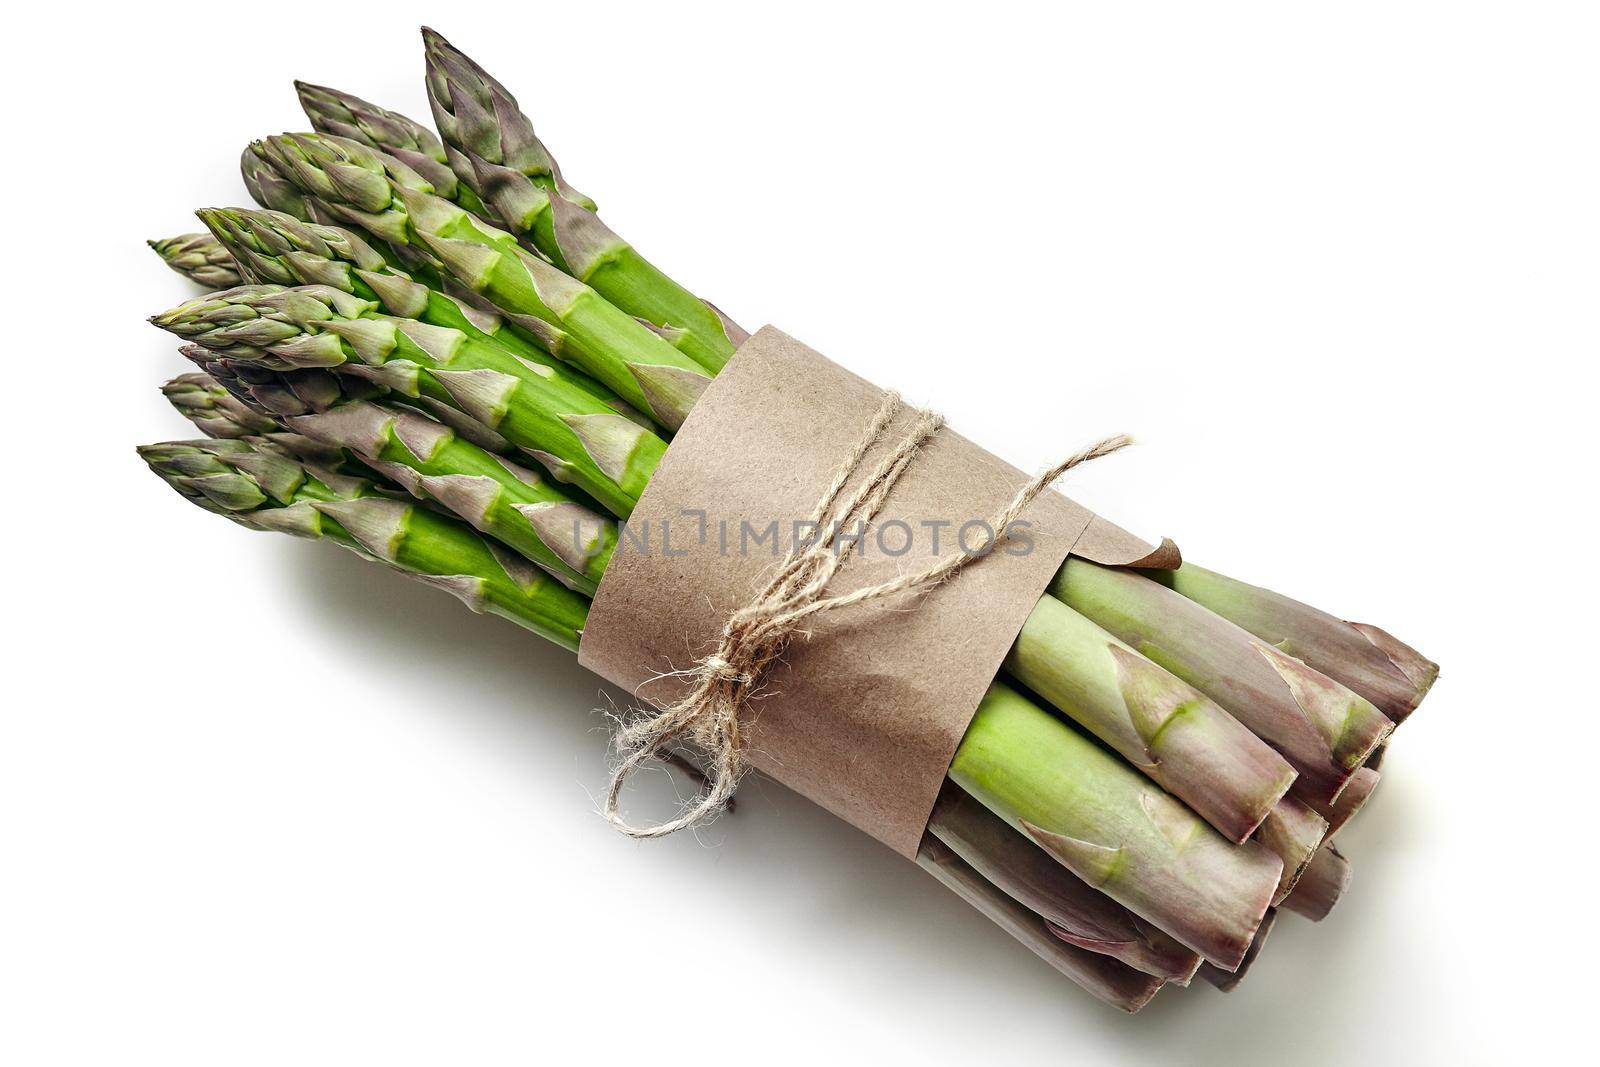 Bunch of an edible, ripe spears of asparagus isolated on white background. Fresh, green vegetables, top view. Healthy eating. Spring harvest, agricultural farming concept.